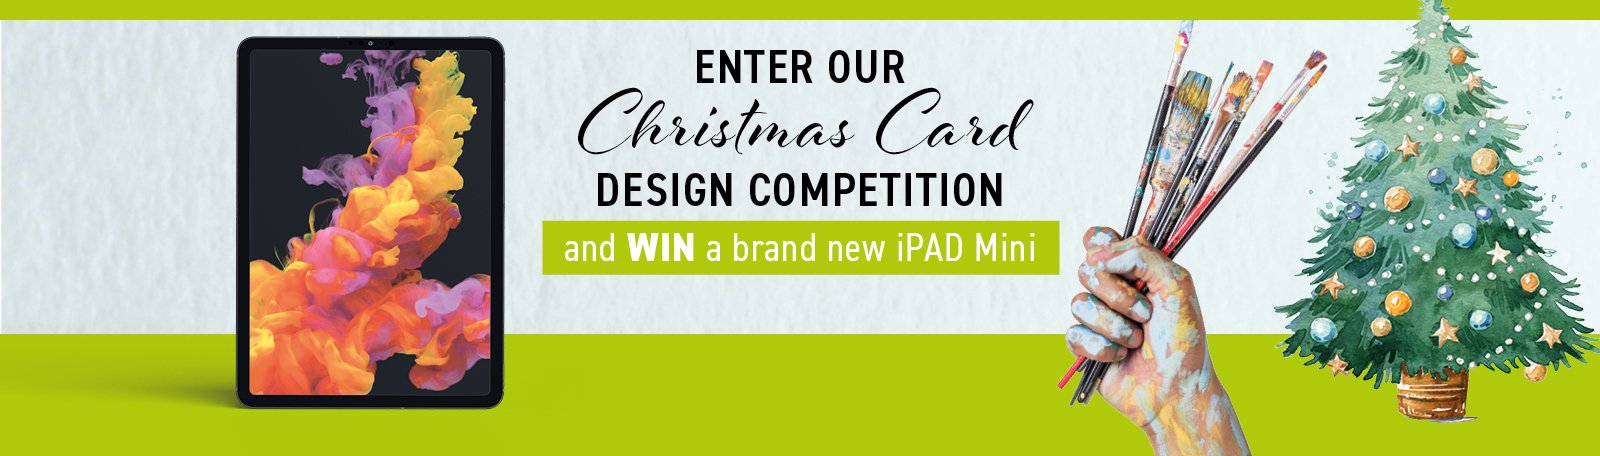 2021 Christmas card design competition - terms and conditions